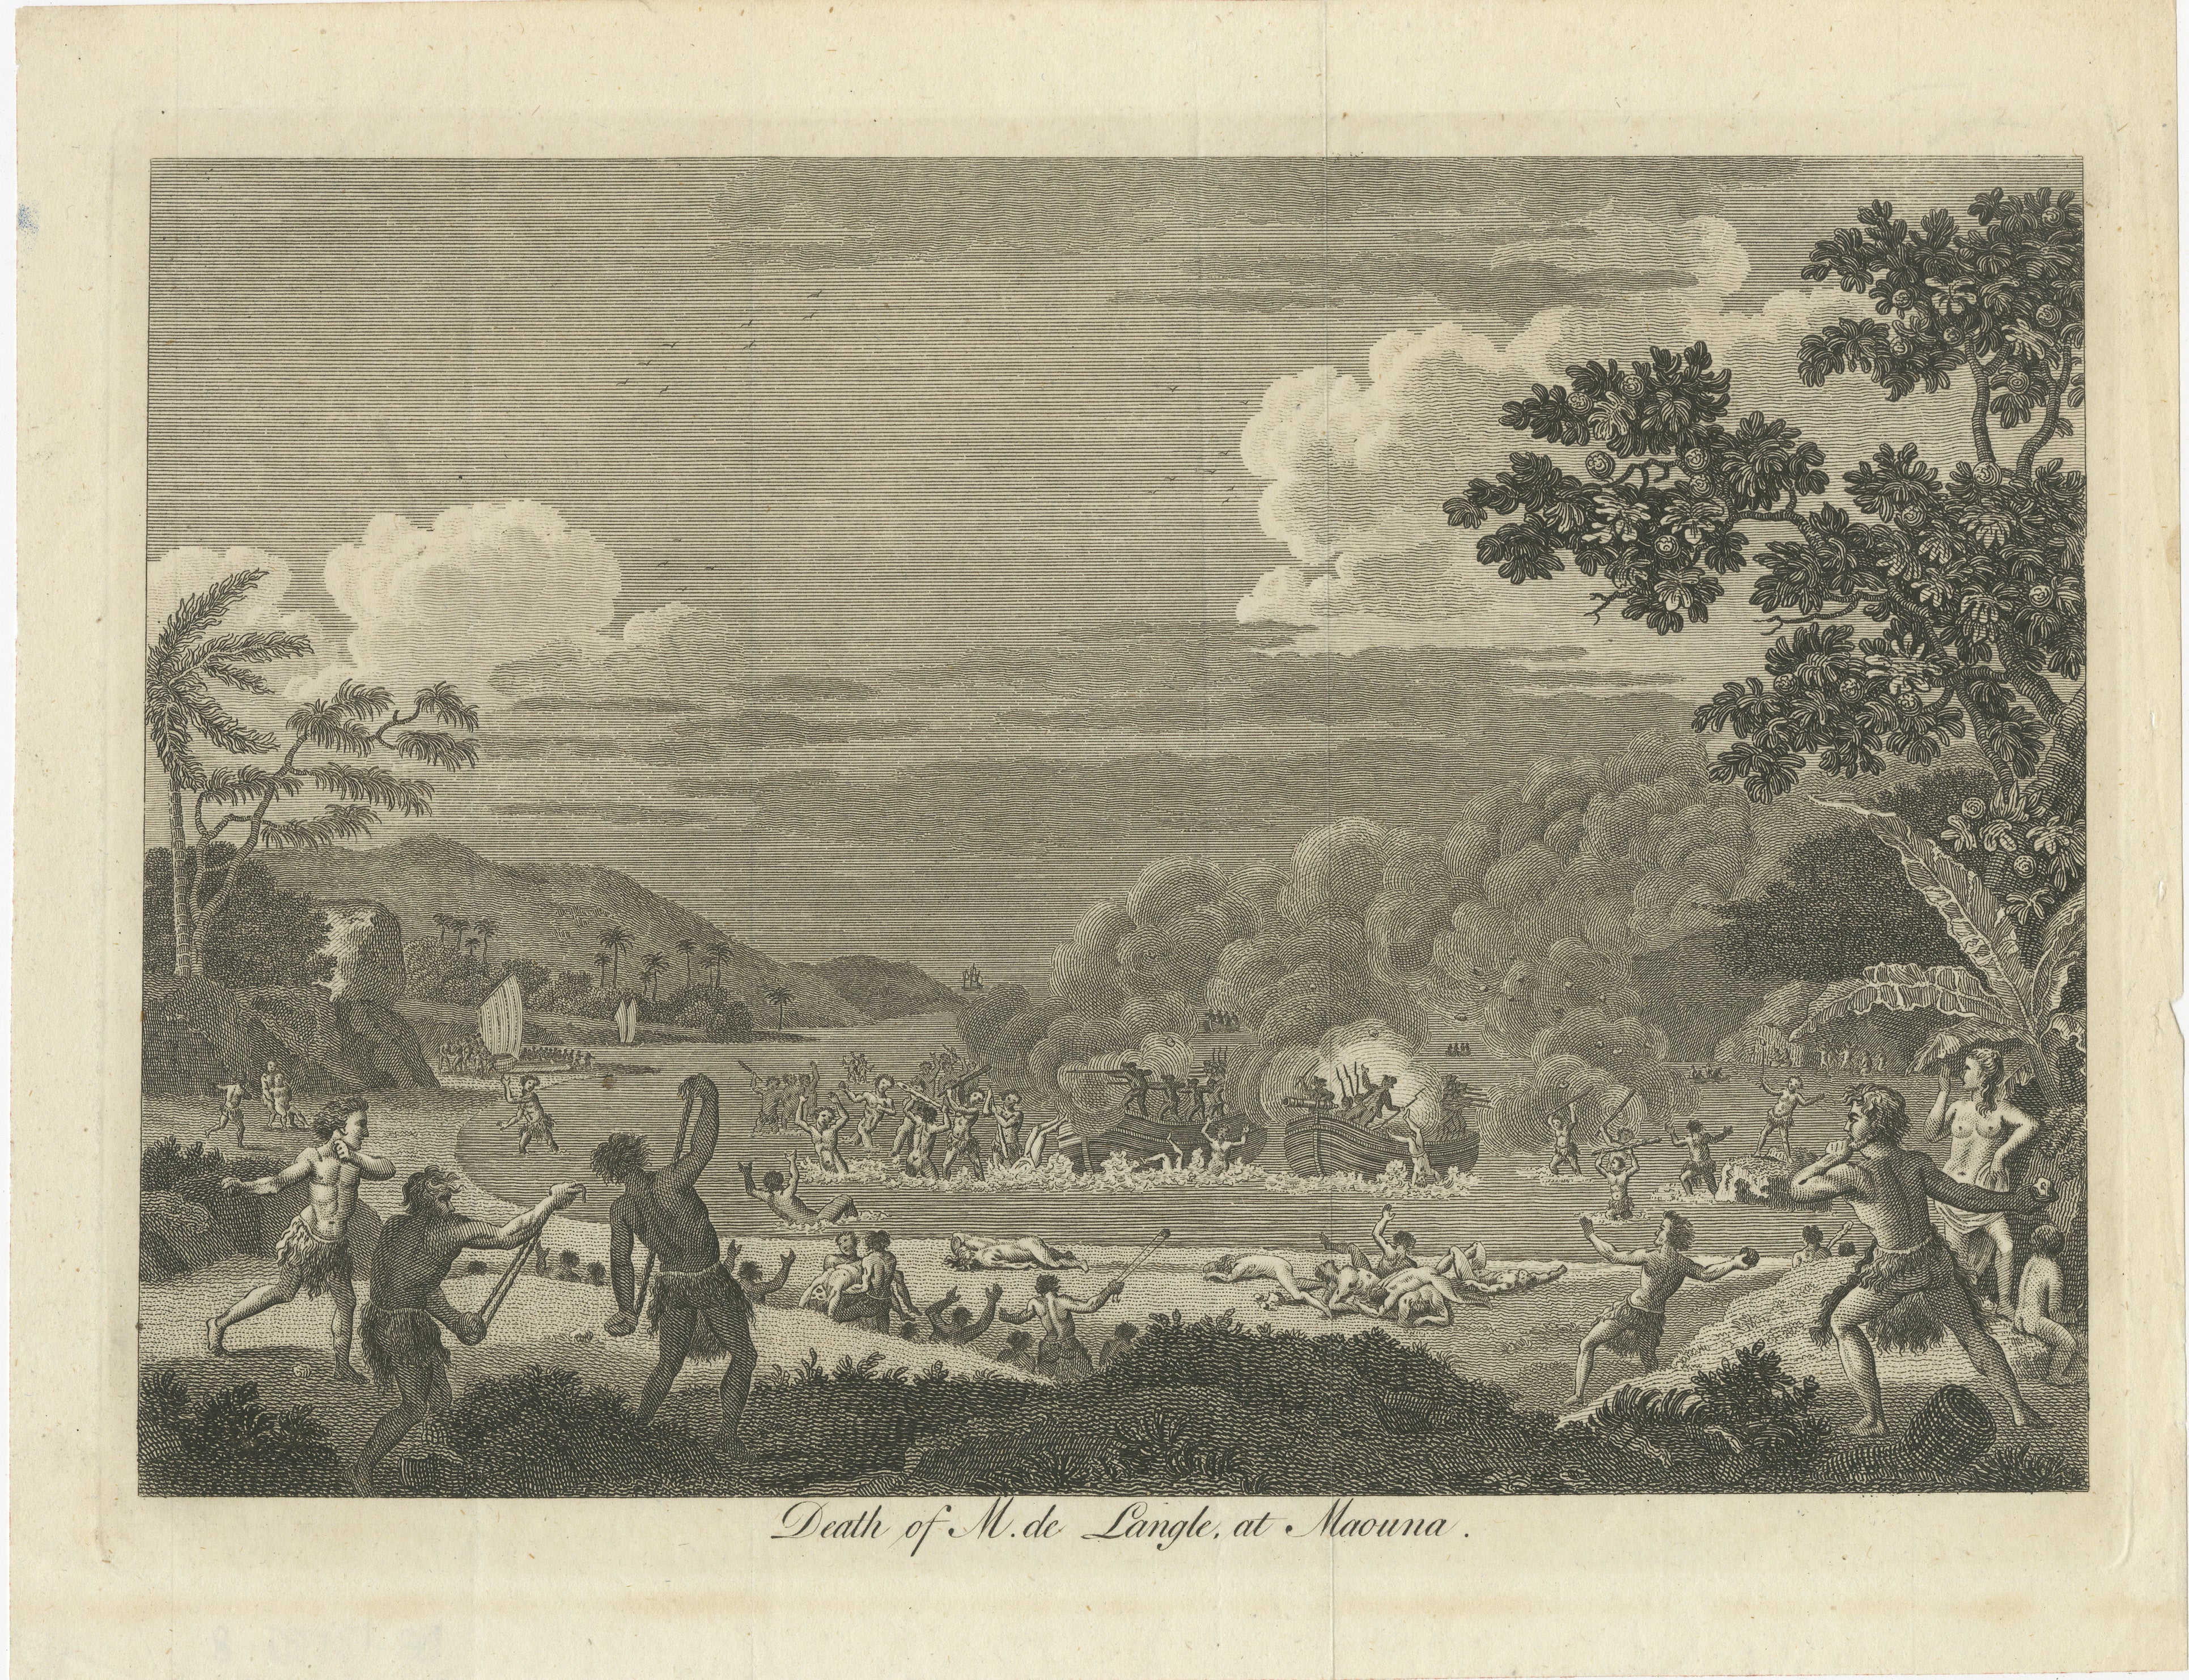 The engraving depicts a harrowing and chaotic scene from an 18th-century exploration, specifically the tragic event involving Commander Fleuriot de Langle and his men. The scene is set on the shores of an island identified as Maouna, and it captures